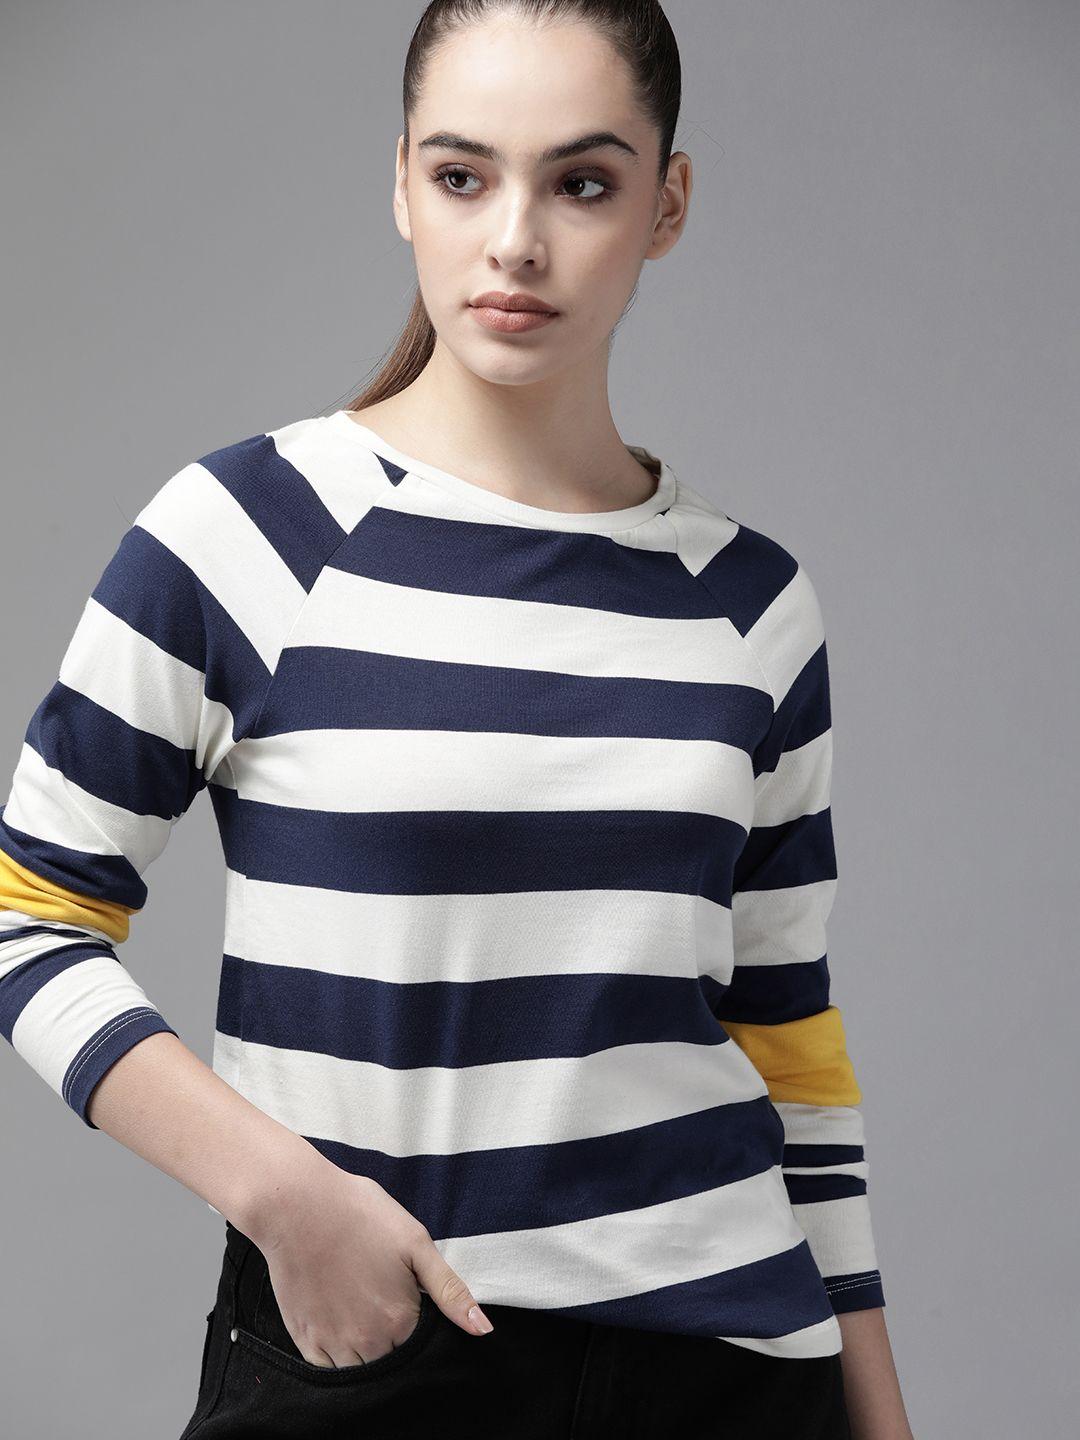 the roadster lifestyle co women navy blue & white striped cotton t-shirt